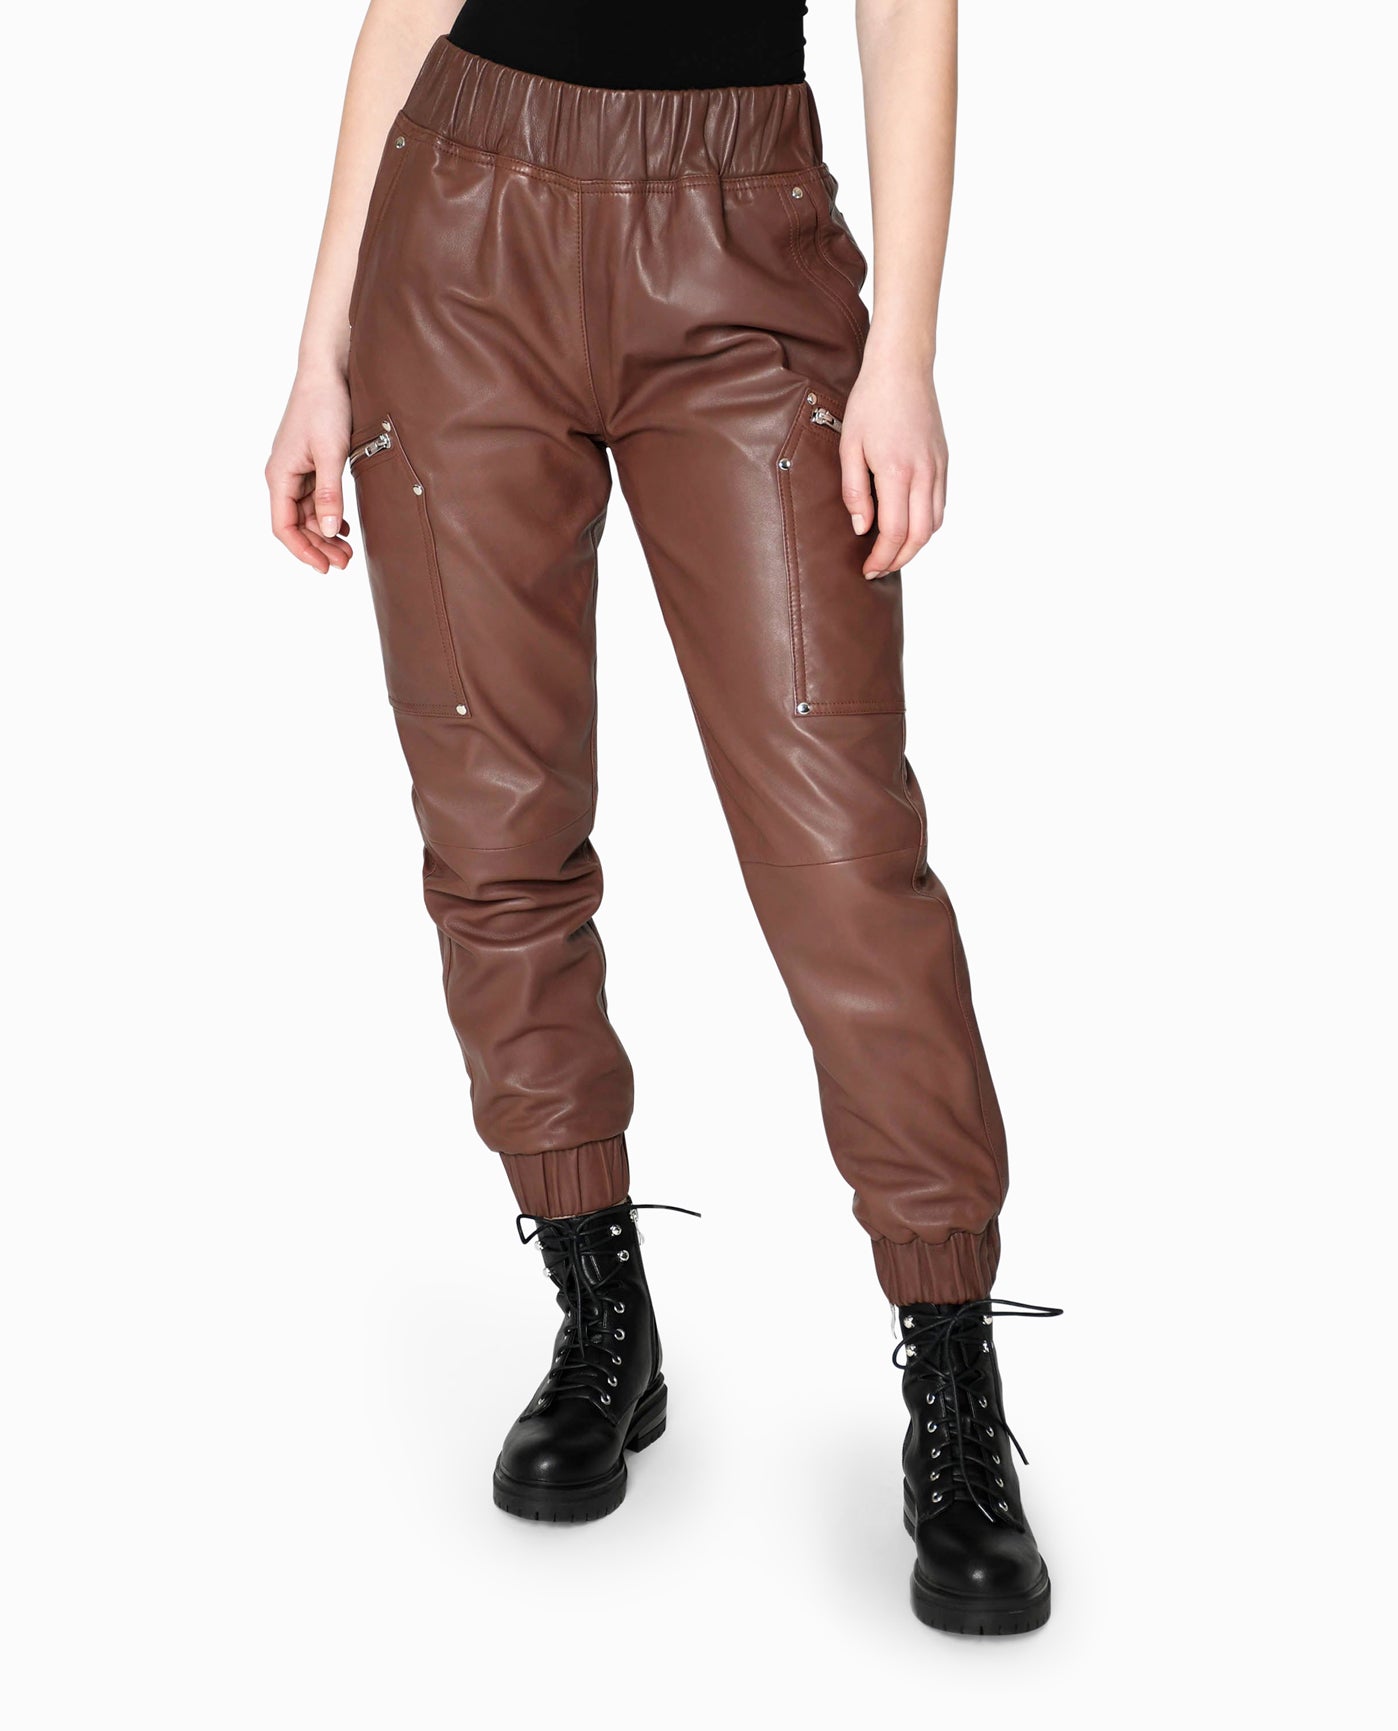 Women's Leather Space Jogger – Nicole Miller